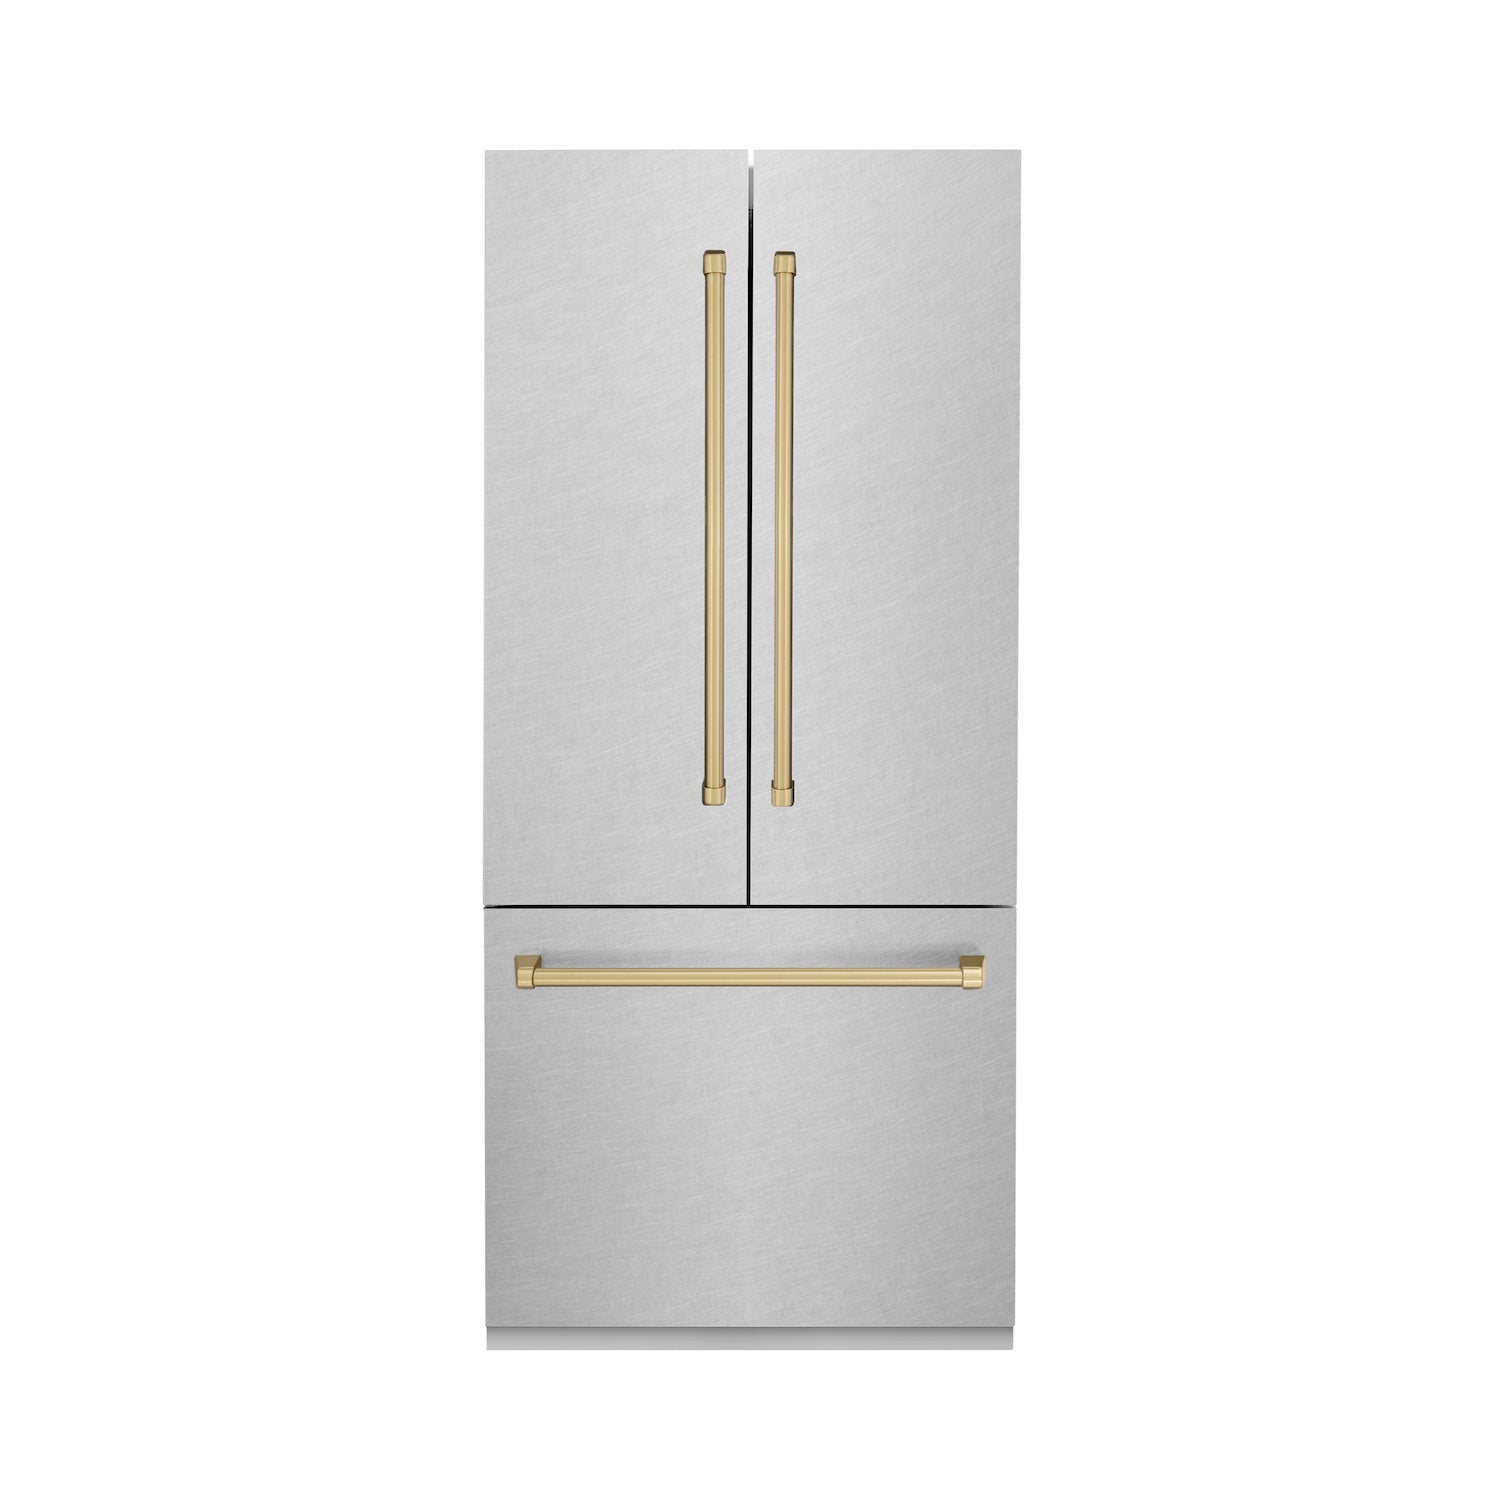 ZLINE Autograph Edition 36 in. 19.6 cu. ft. Built-in 2-Door Bottom Freezer Refrigerator with Internal Water and Ice Dispenser in Fingerprint Resistant Stainless Steel with Champagne Bronze Accents (RBIVZ-SN-36-CB) 